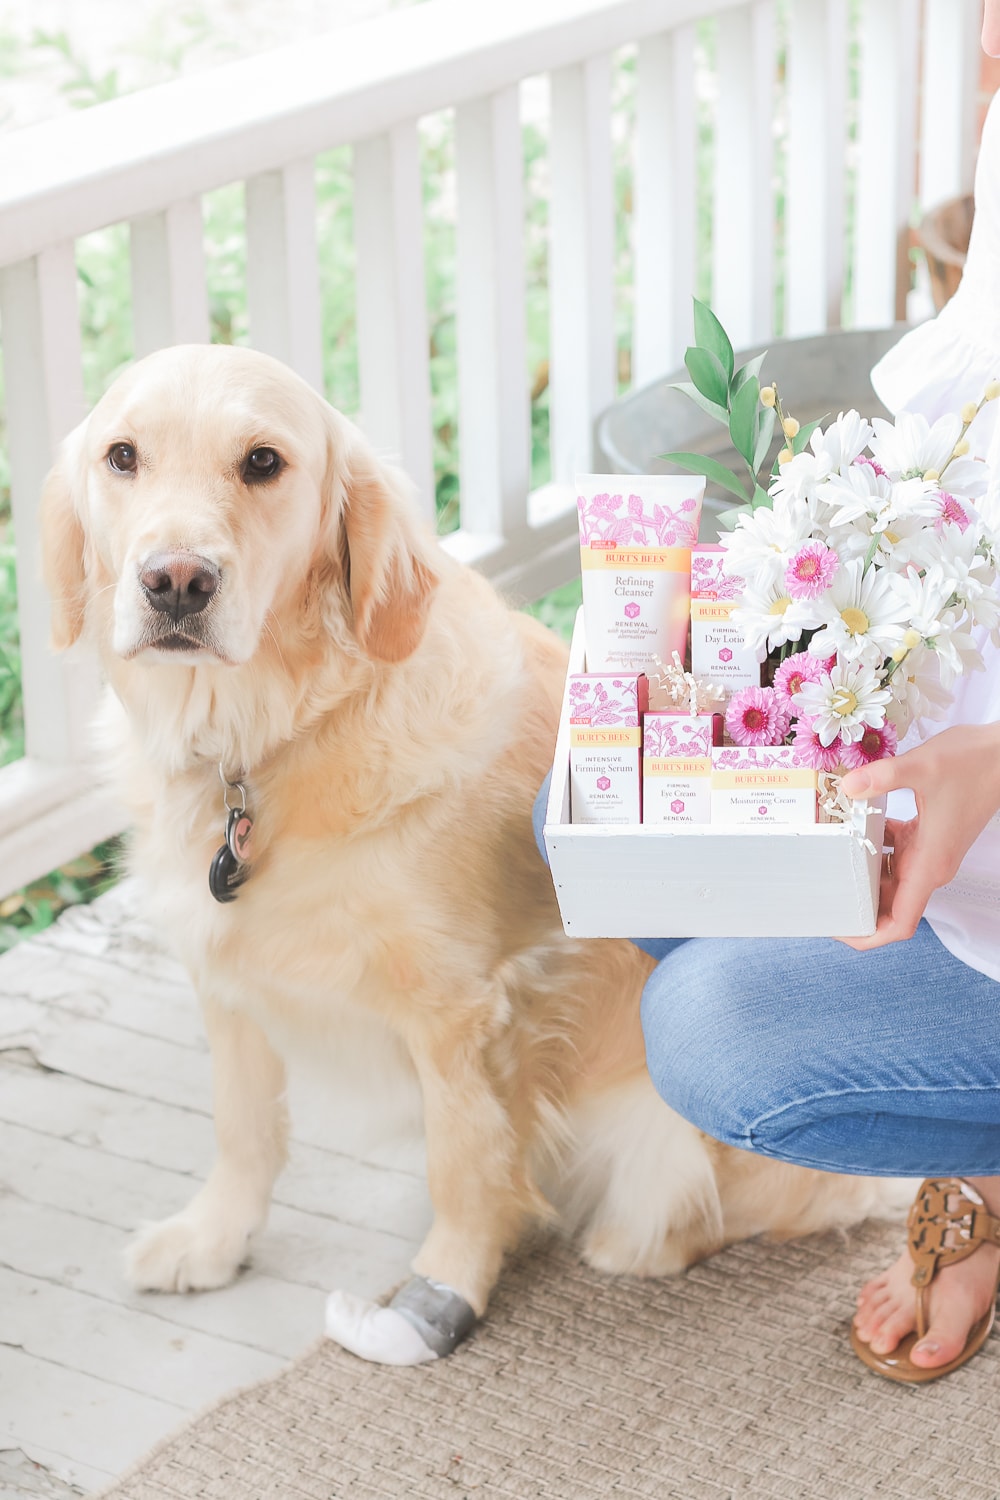 Beauty blogger Stephanie Ziajka shares a Burt's Bees Renewal review with her golden retriever, Nala, on Diary of a Debutante